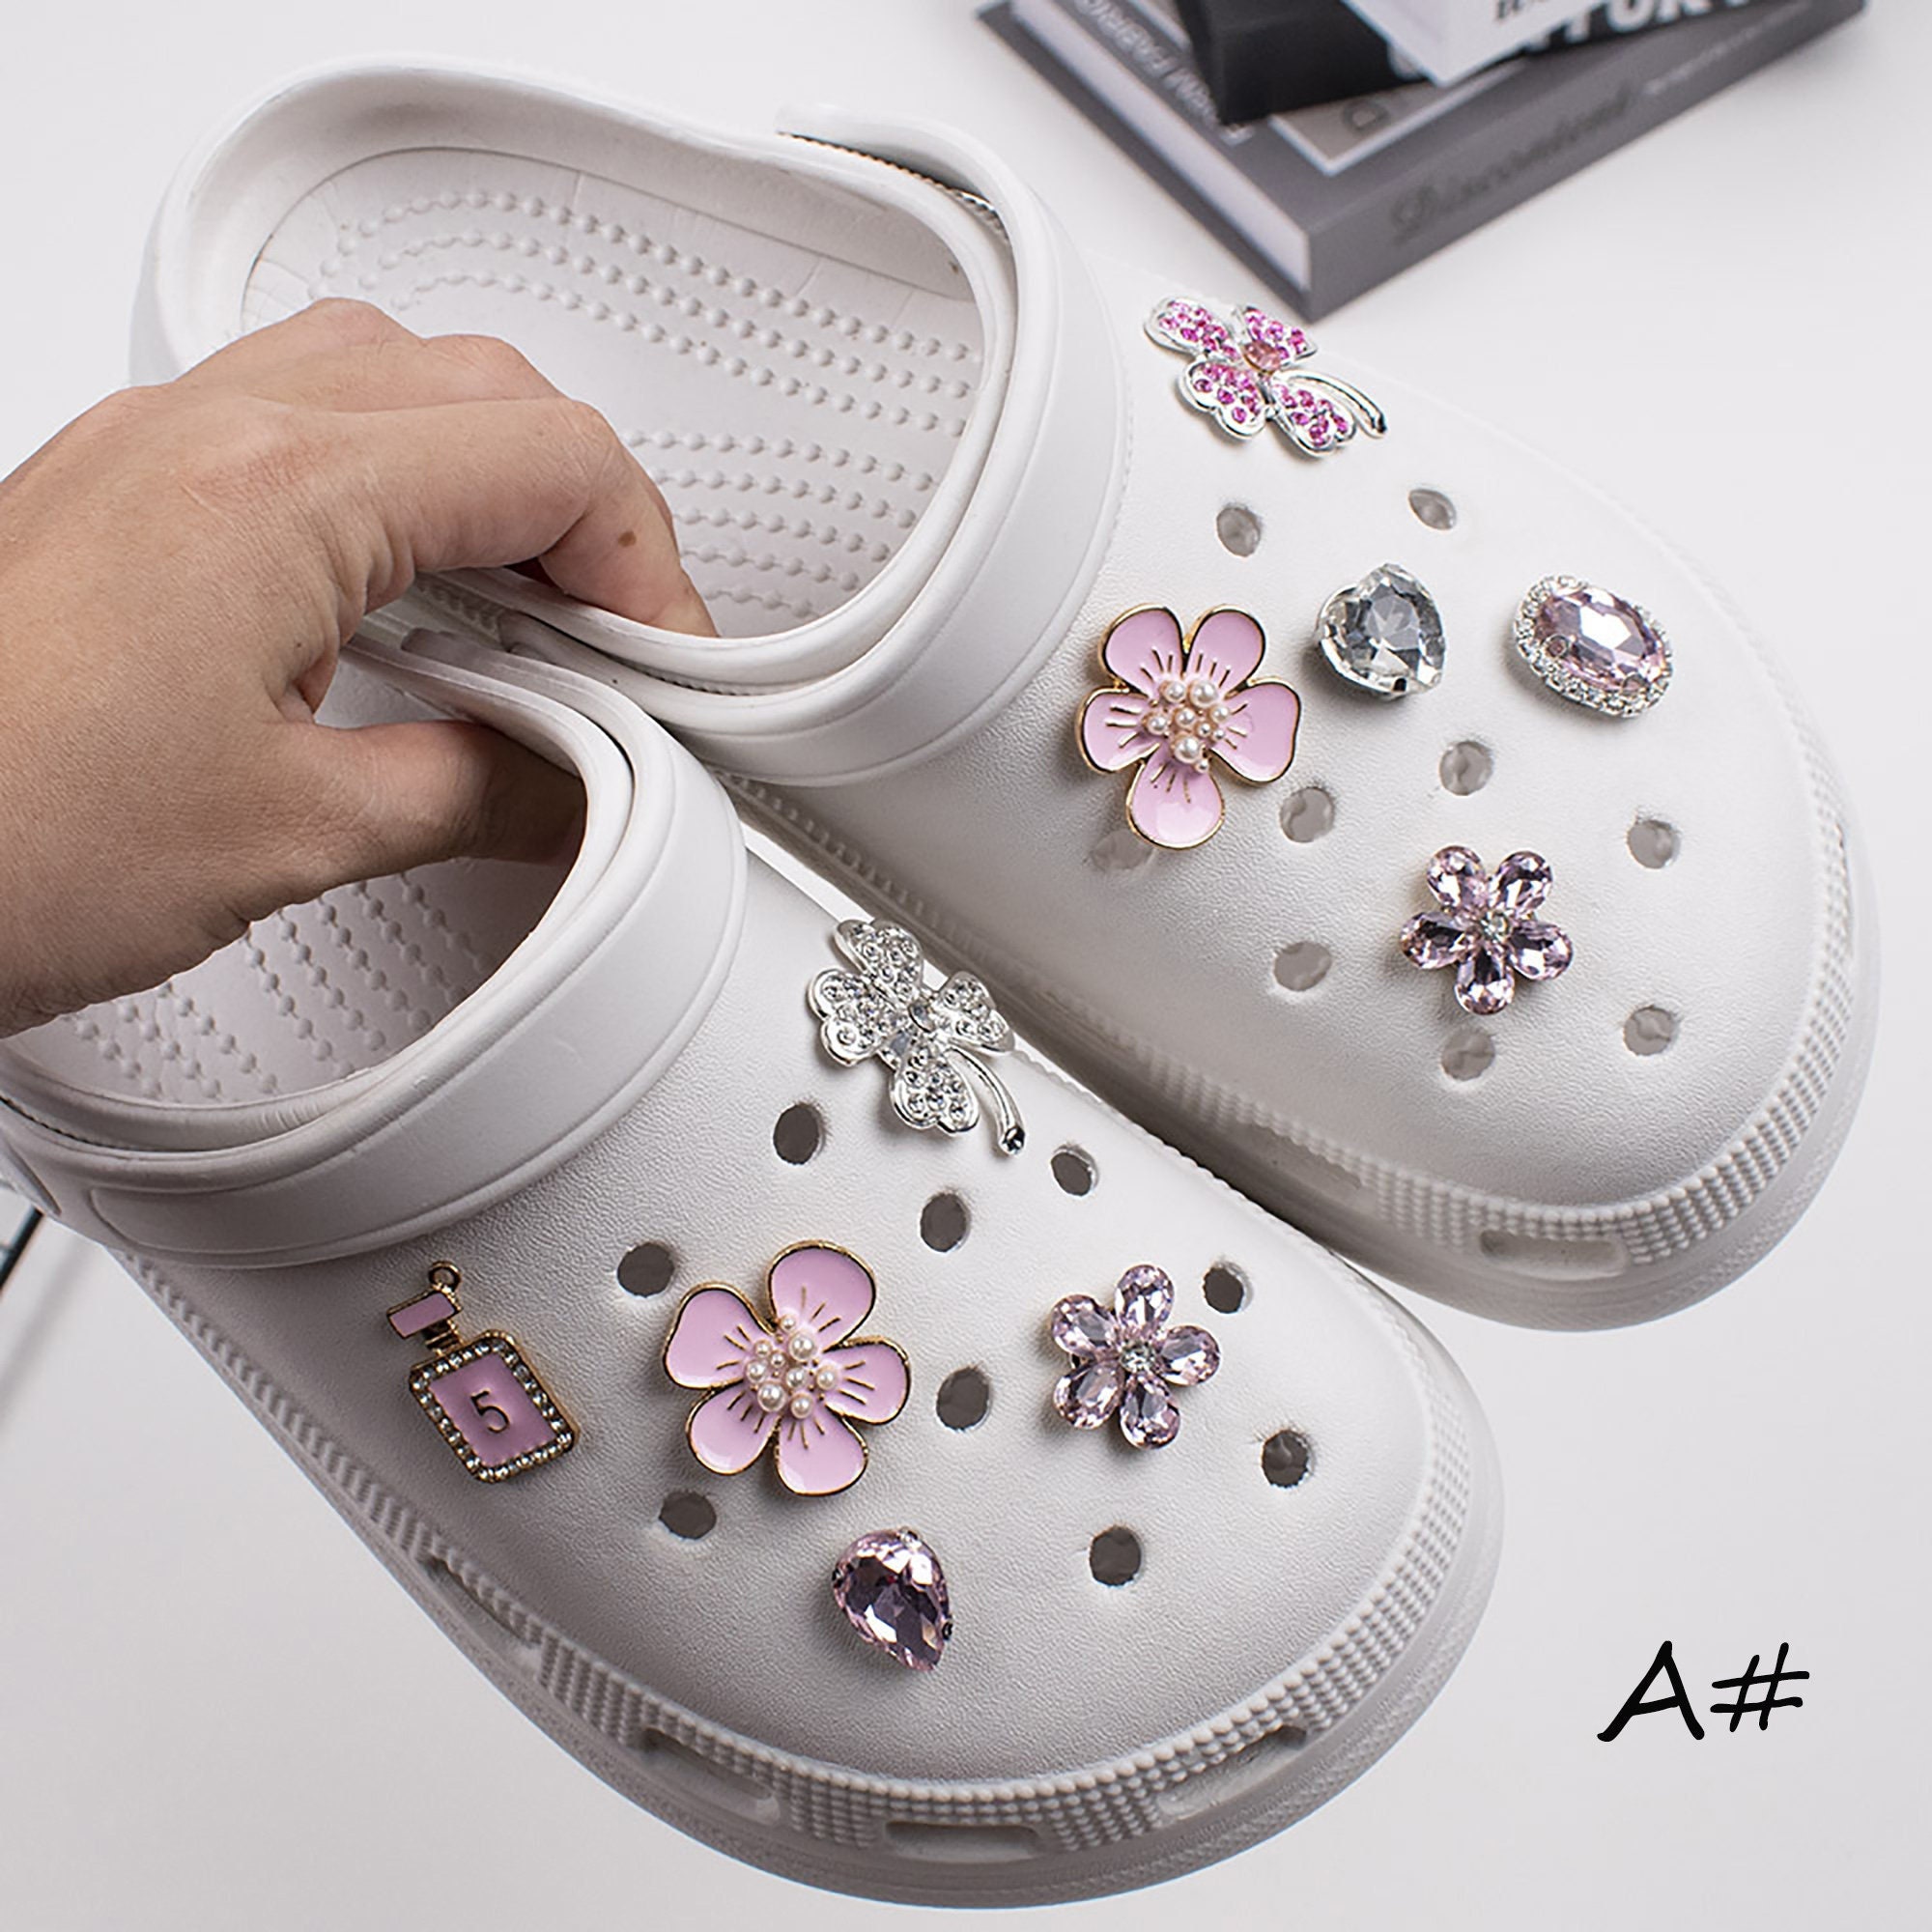 JIBZ Designer Croc Croc Bling Charms Rhinestone Bling For Clogs, Metal  Accessories Perfect Gift For Girls 2108 From Ai806, $25.97